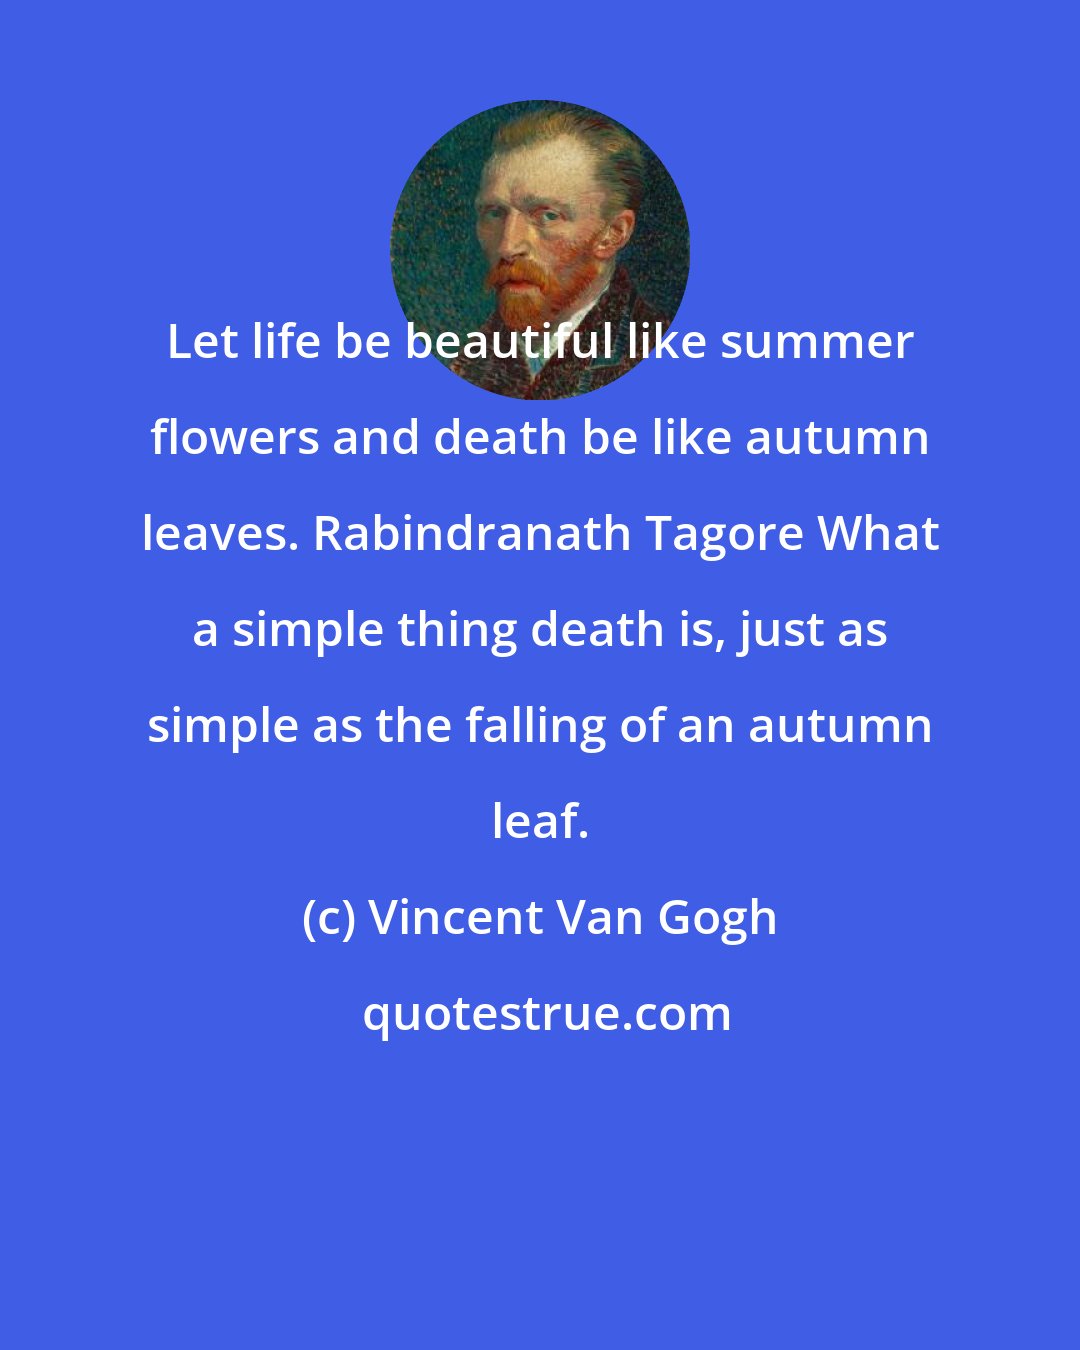 Vincent Van Gogh: Let life be beautiful like summer flowers and death be like autumn leaves. Rabindranath Tagore What a simple thing death is, just as simple as the falling of an autumn leaf.